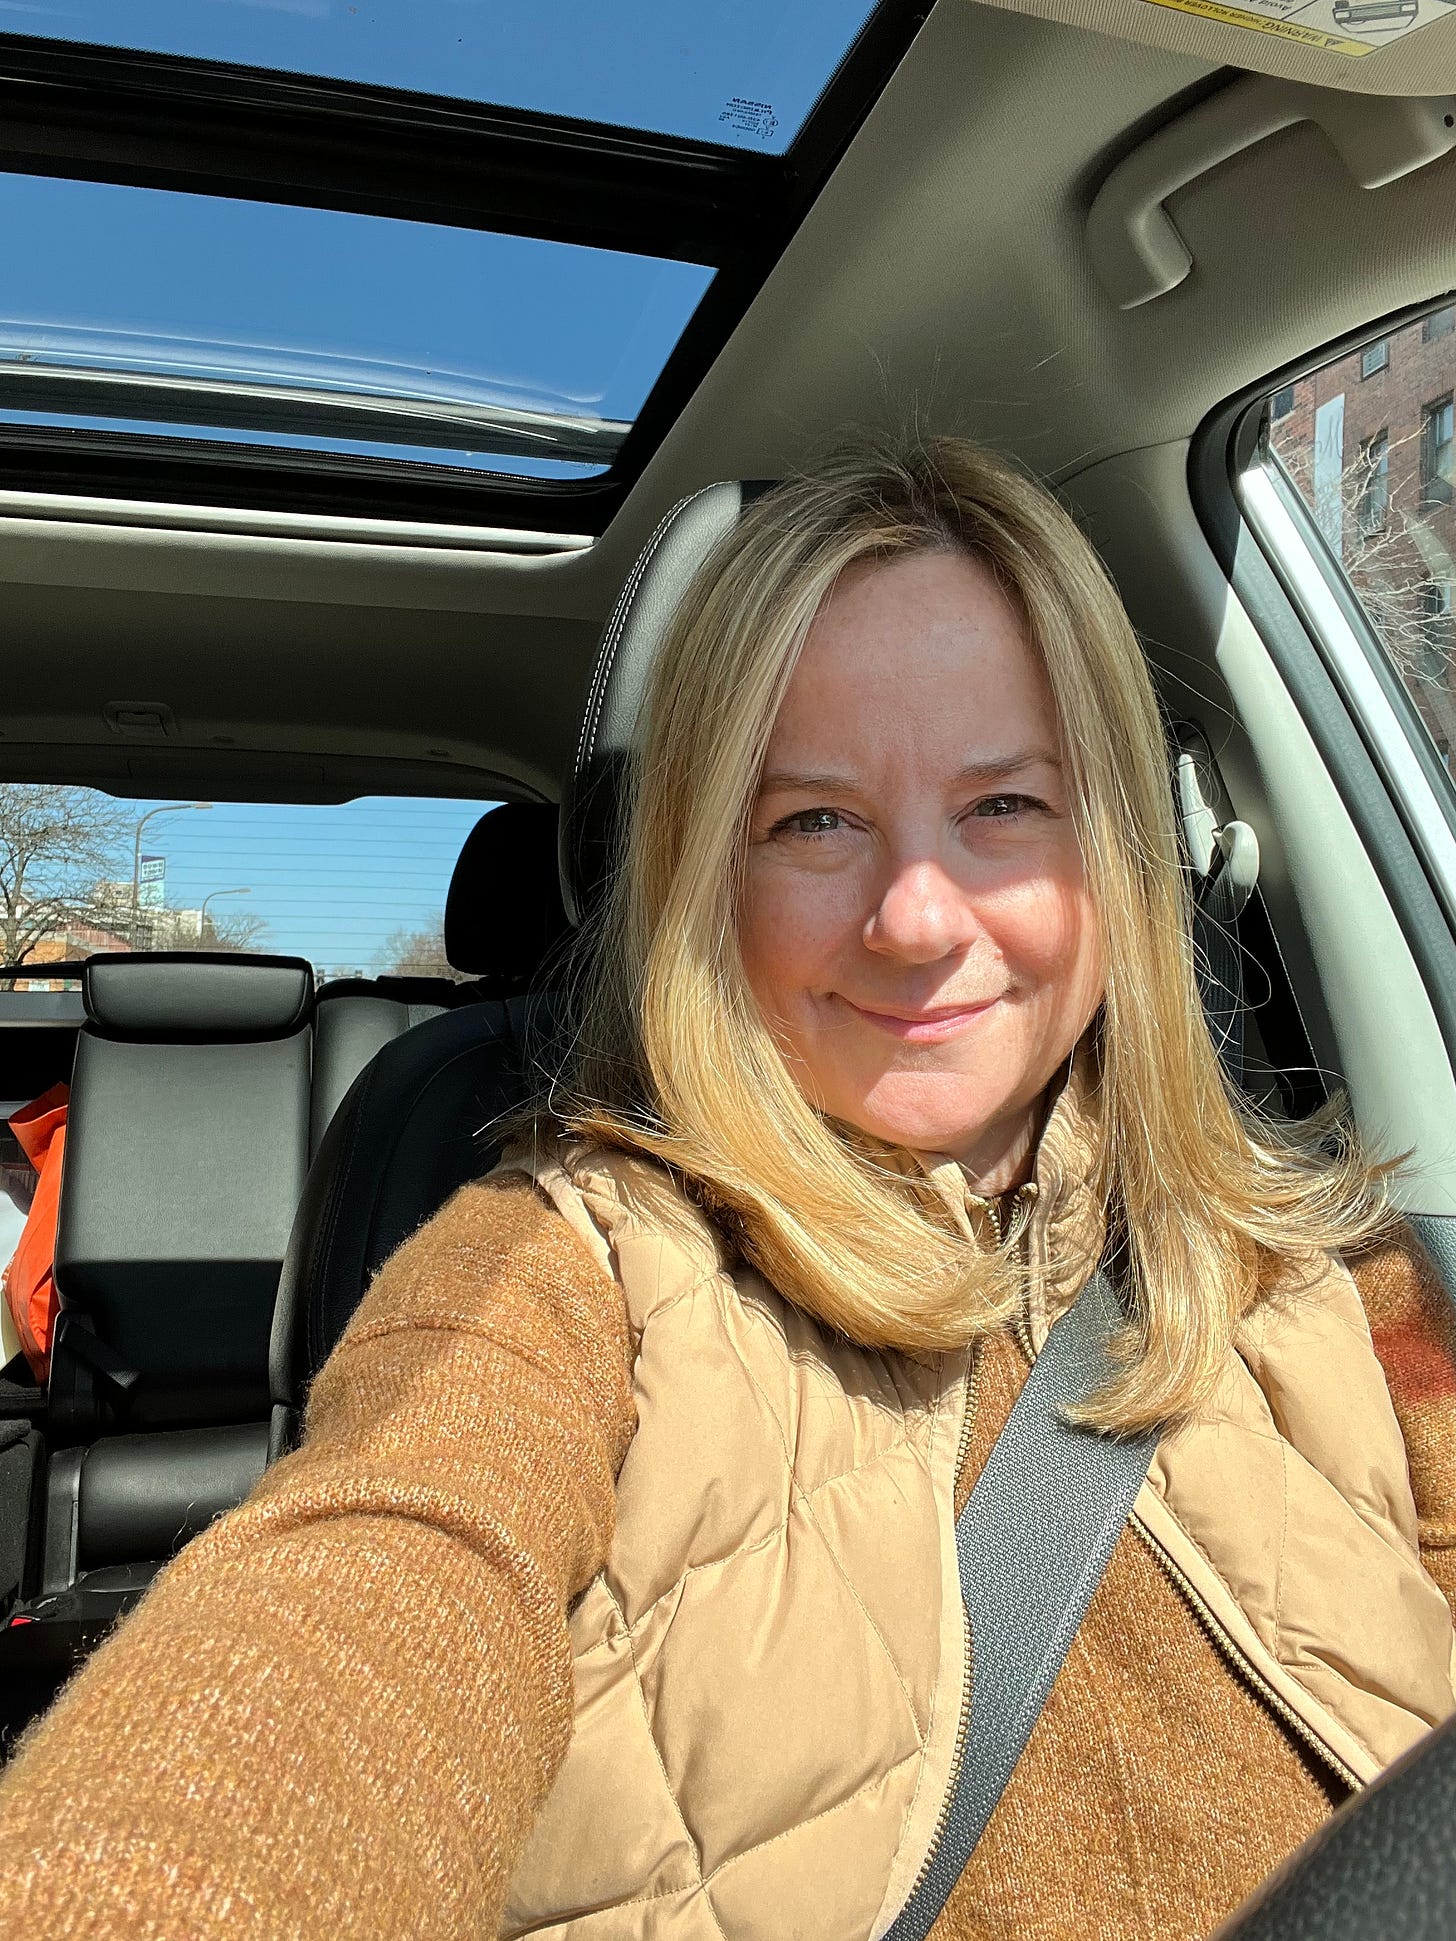 Blonde woman in a car with a sunroof. Blue sky can be seen through the sunroof. She's wearing a brown sweater and a lighter brown vest. 